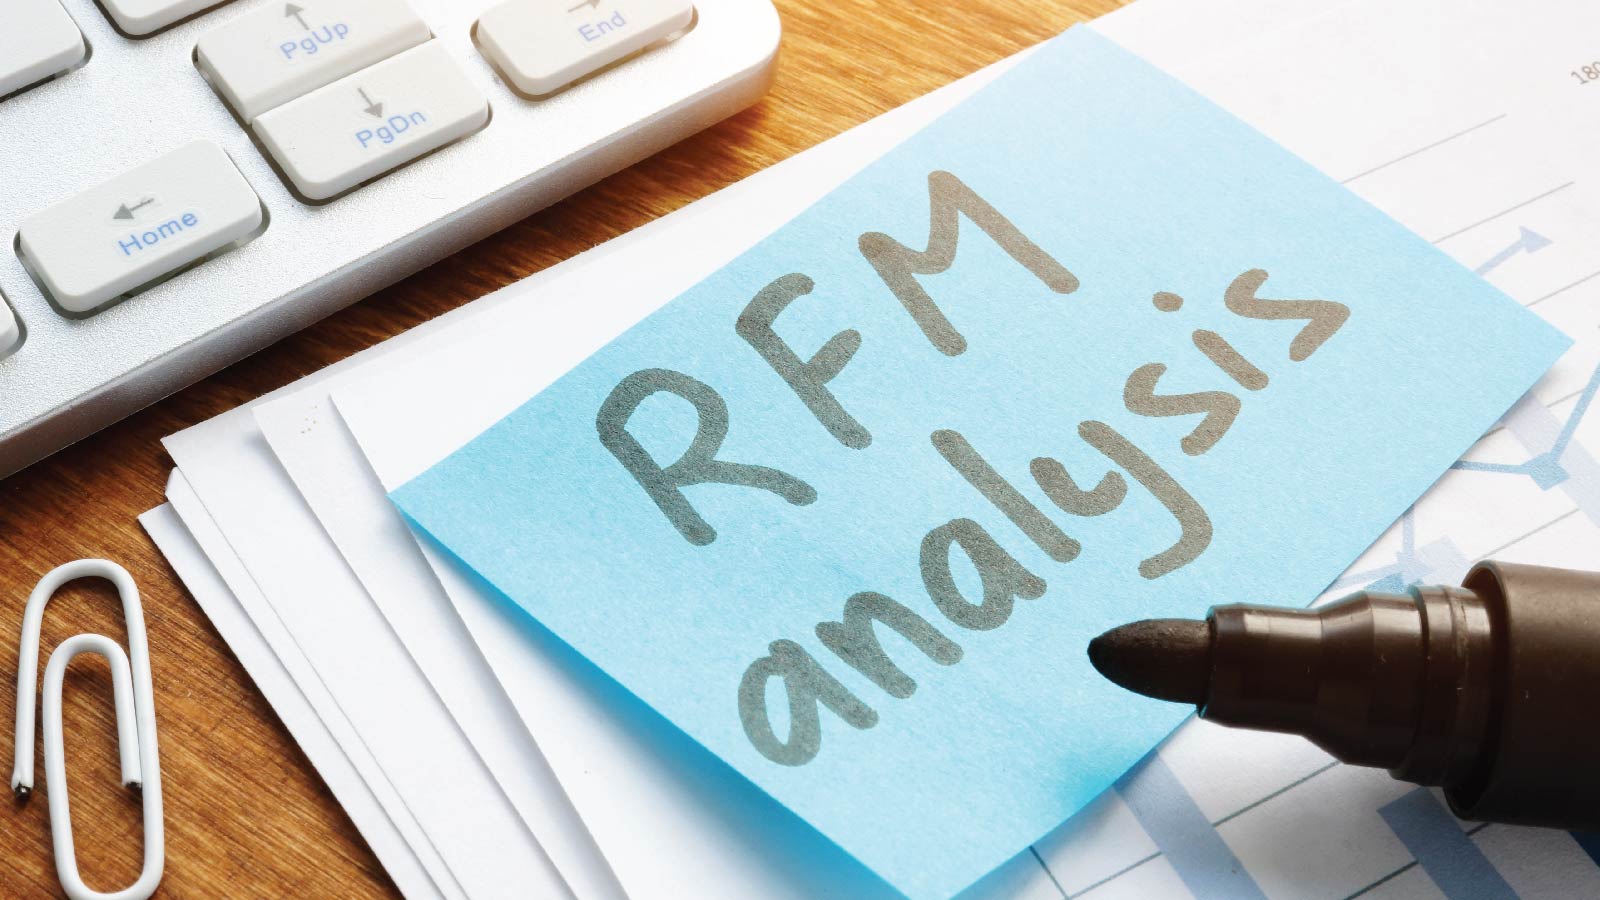 RFM Analysis: How to Increase the Number of Loyal Customers?